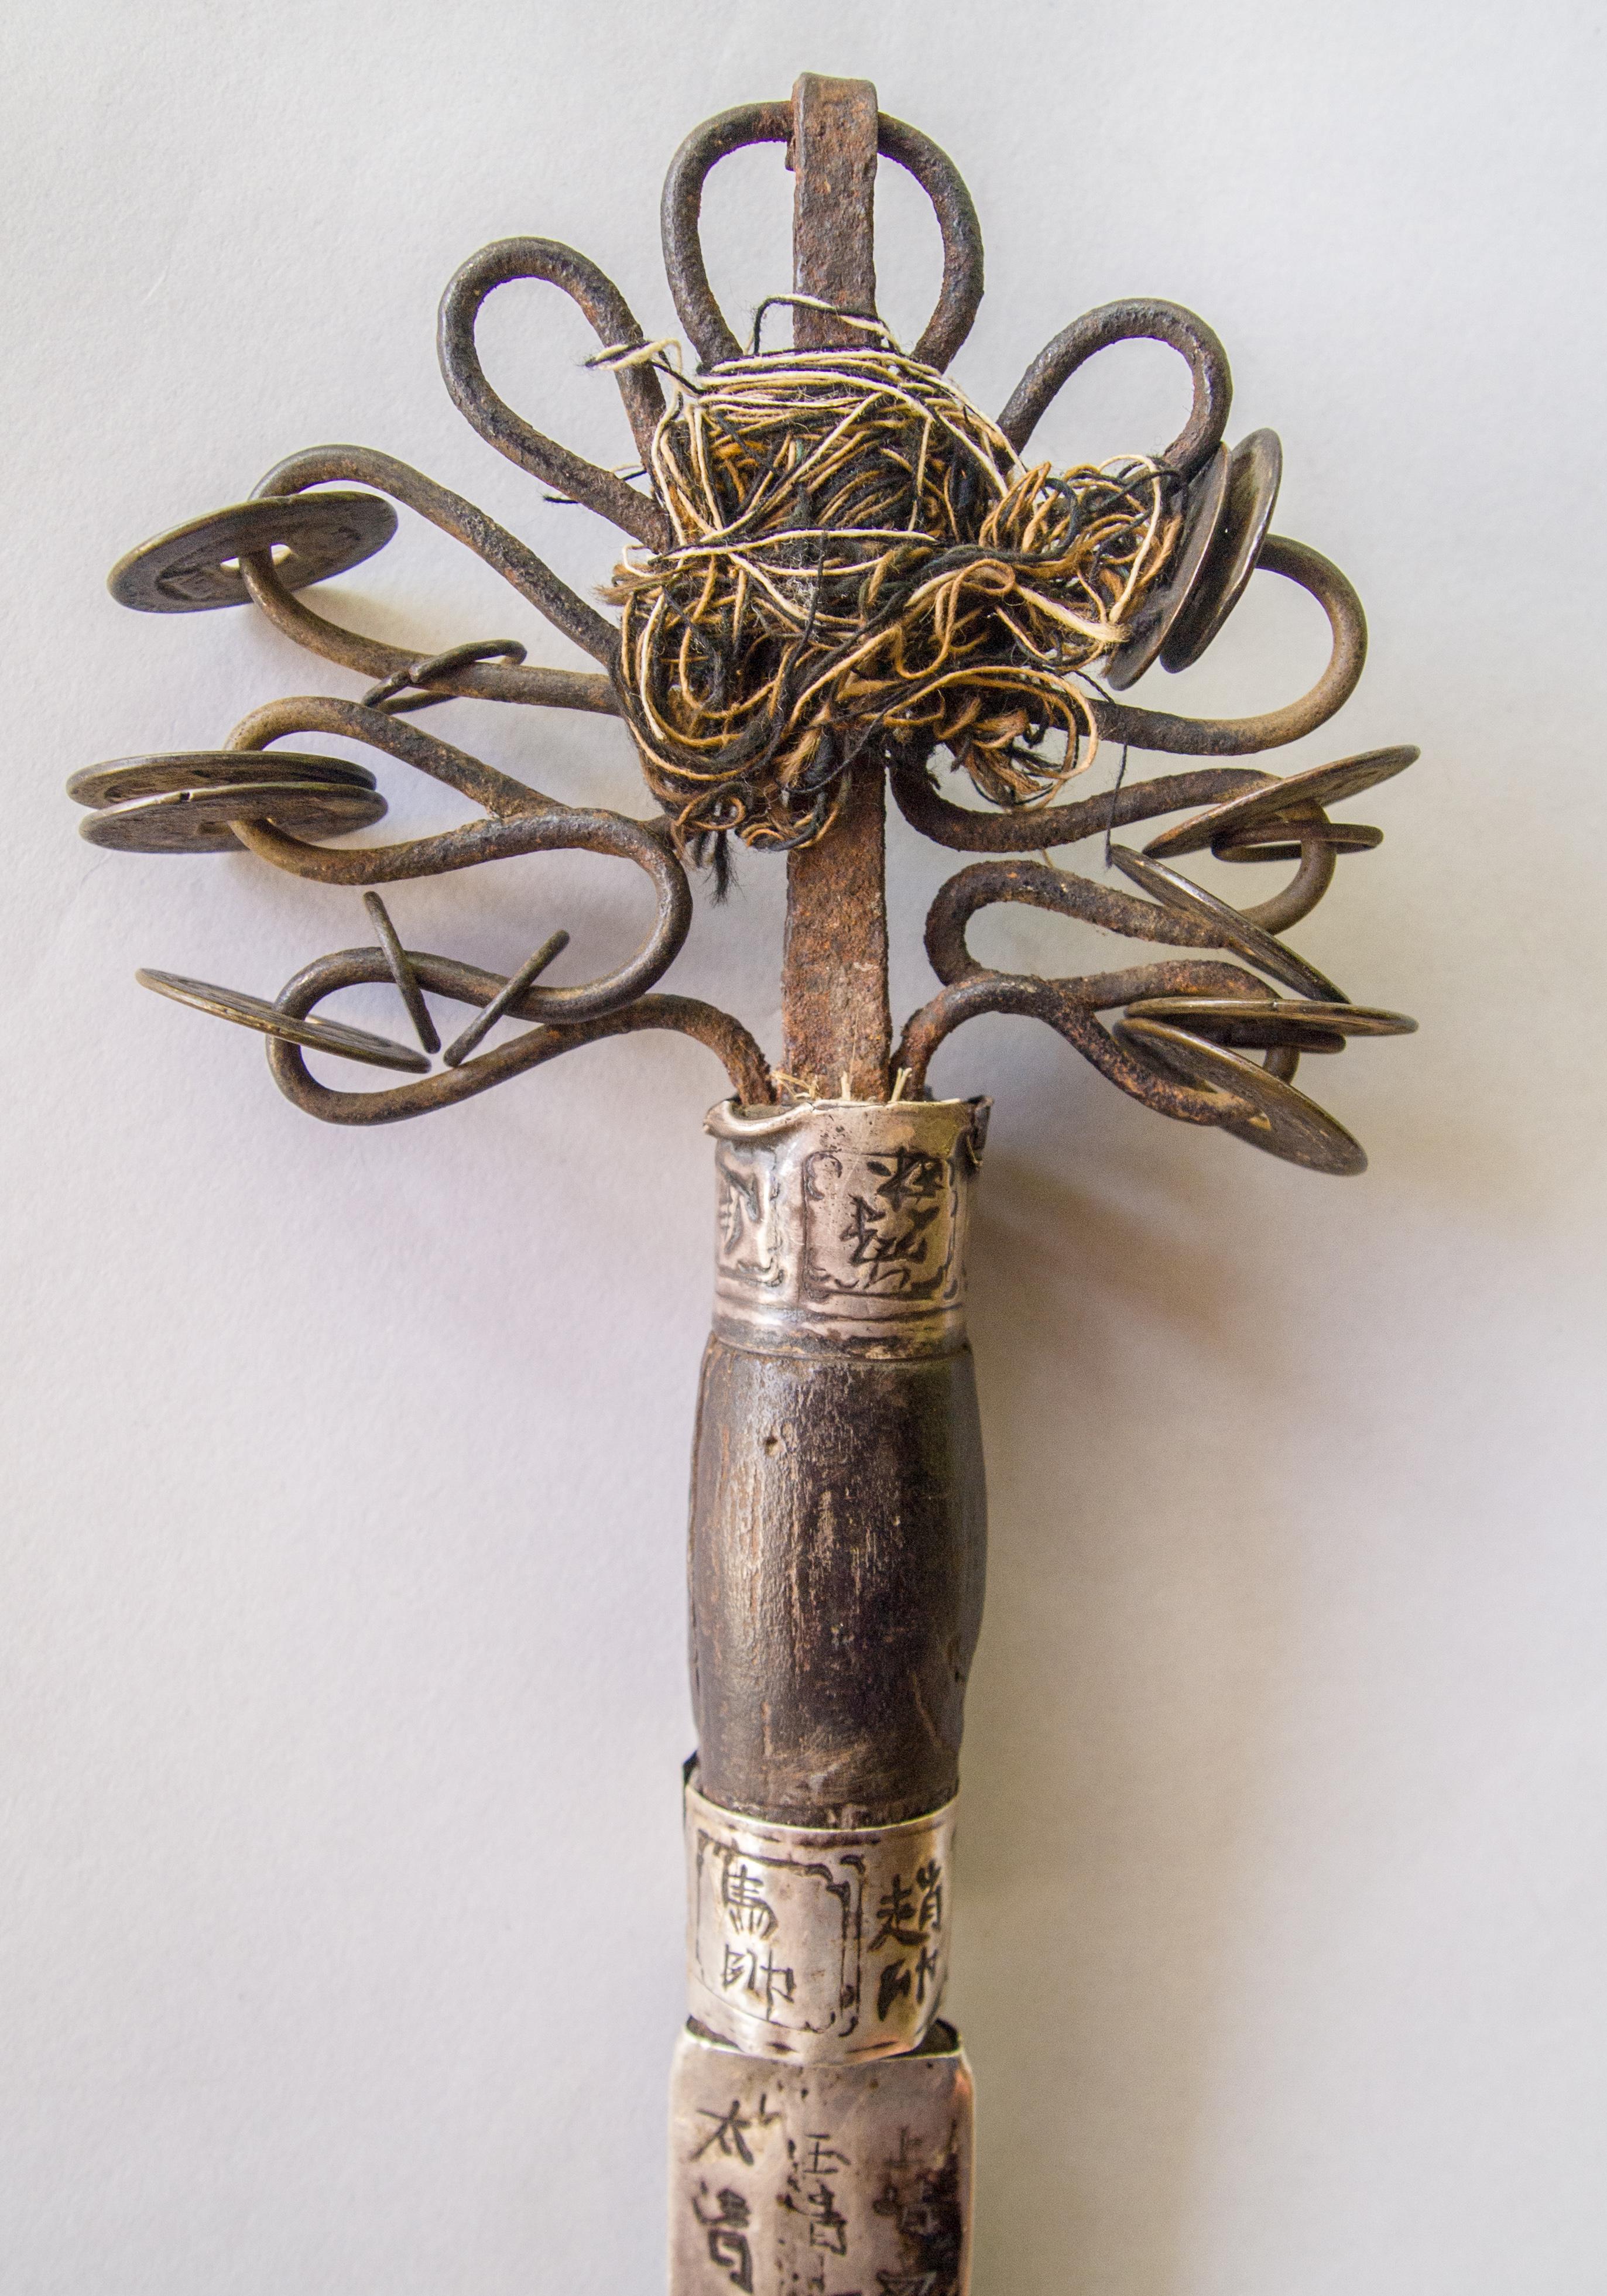 Tribal Yao Ritual Dagger Iron with Coins and Silver Banding Vietnam, Early 20th Century